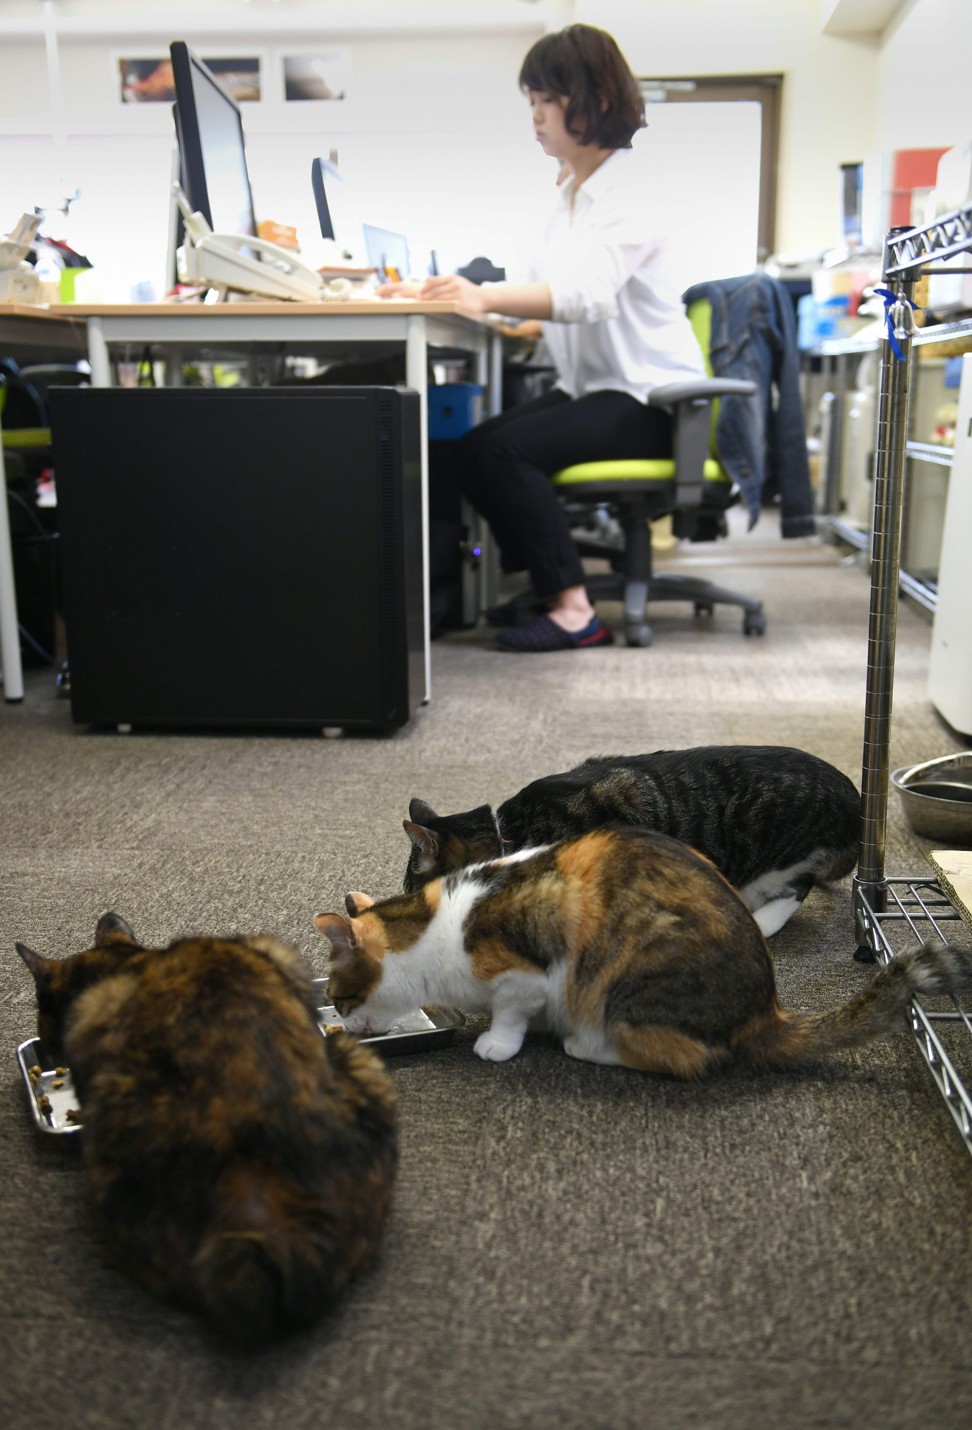 It’s time for lunch in this Tokyo office. Photo: AFP/AFPBB News/Yoko Akiyoshi